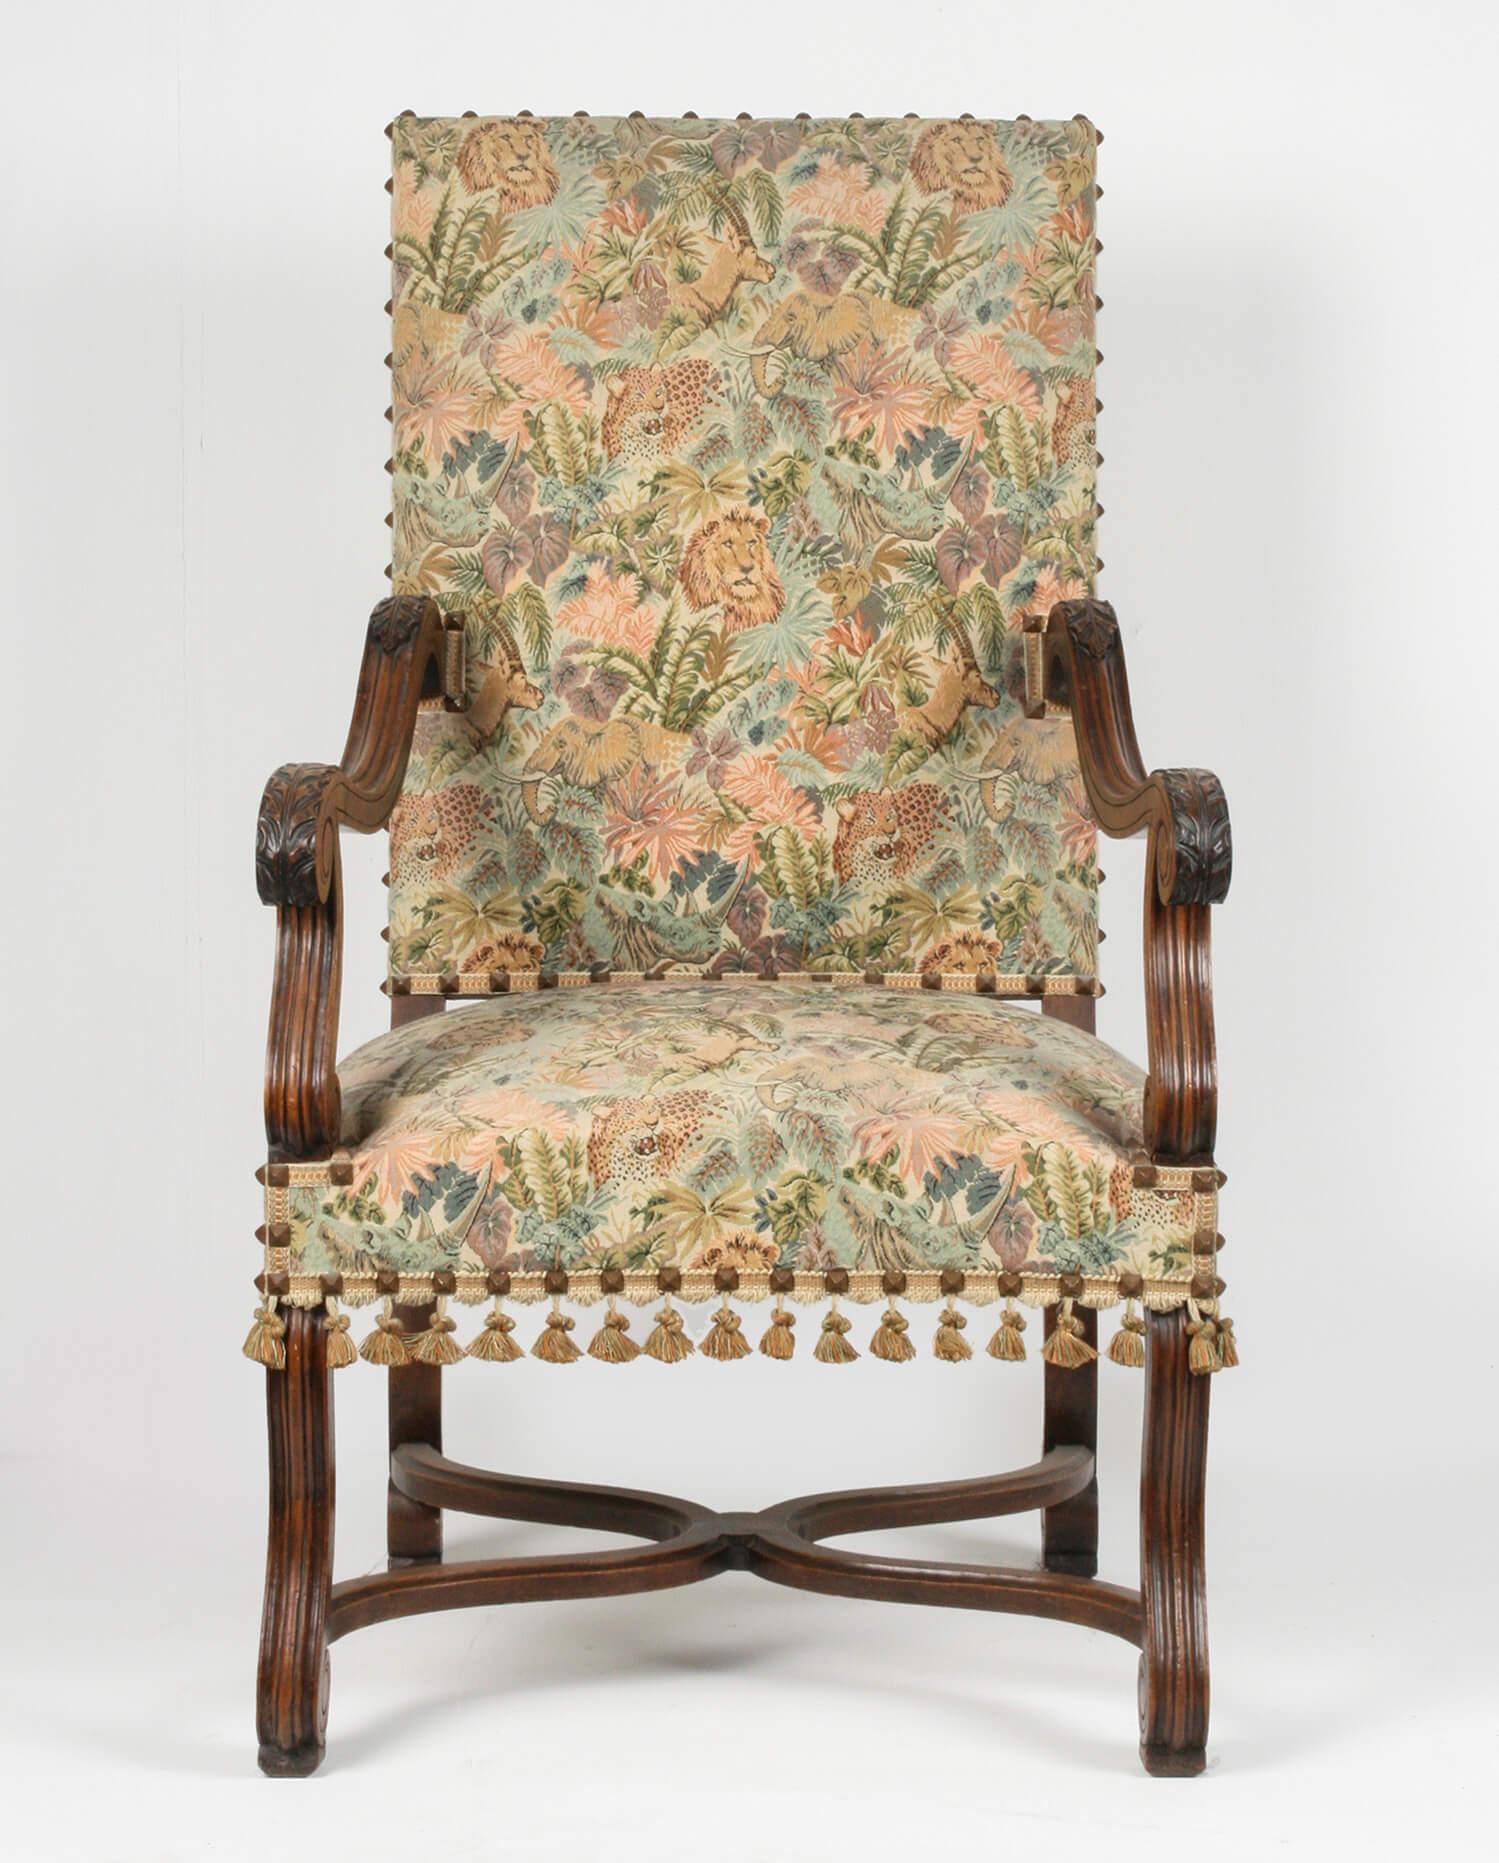 A late 19th century Baroque style armchair. Made from solid walnut. It have 